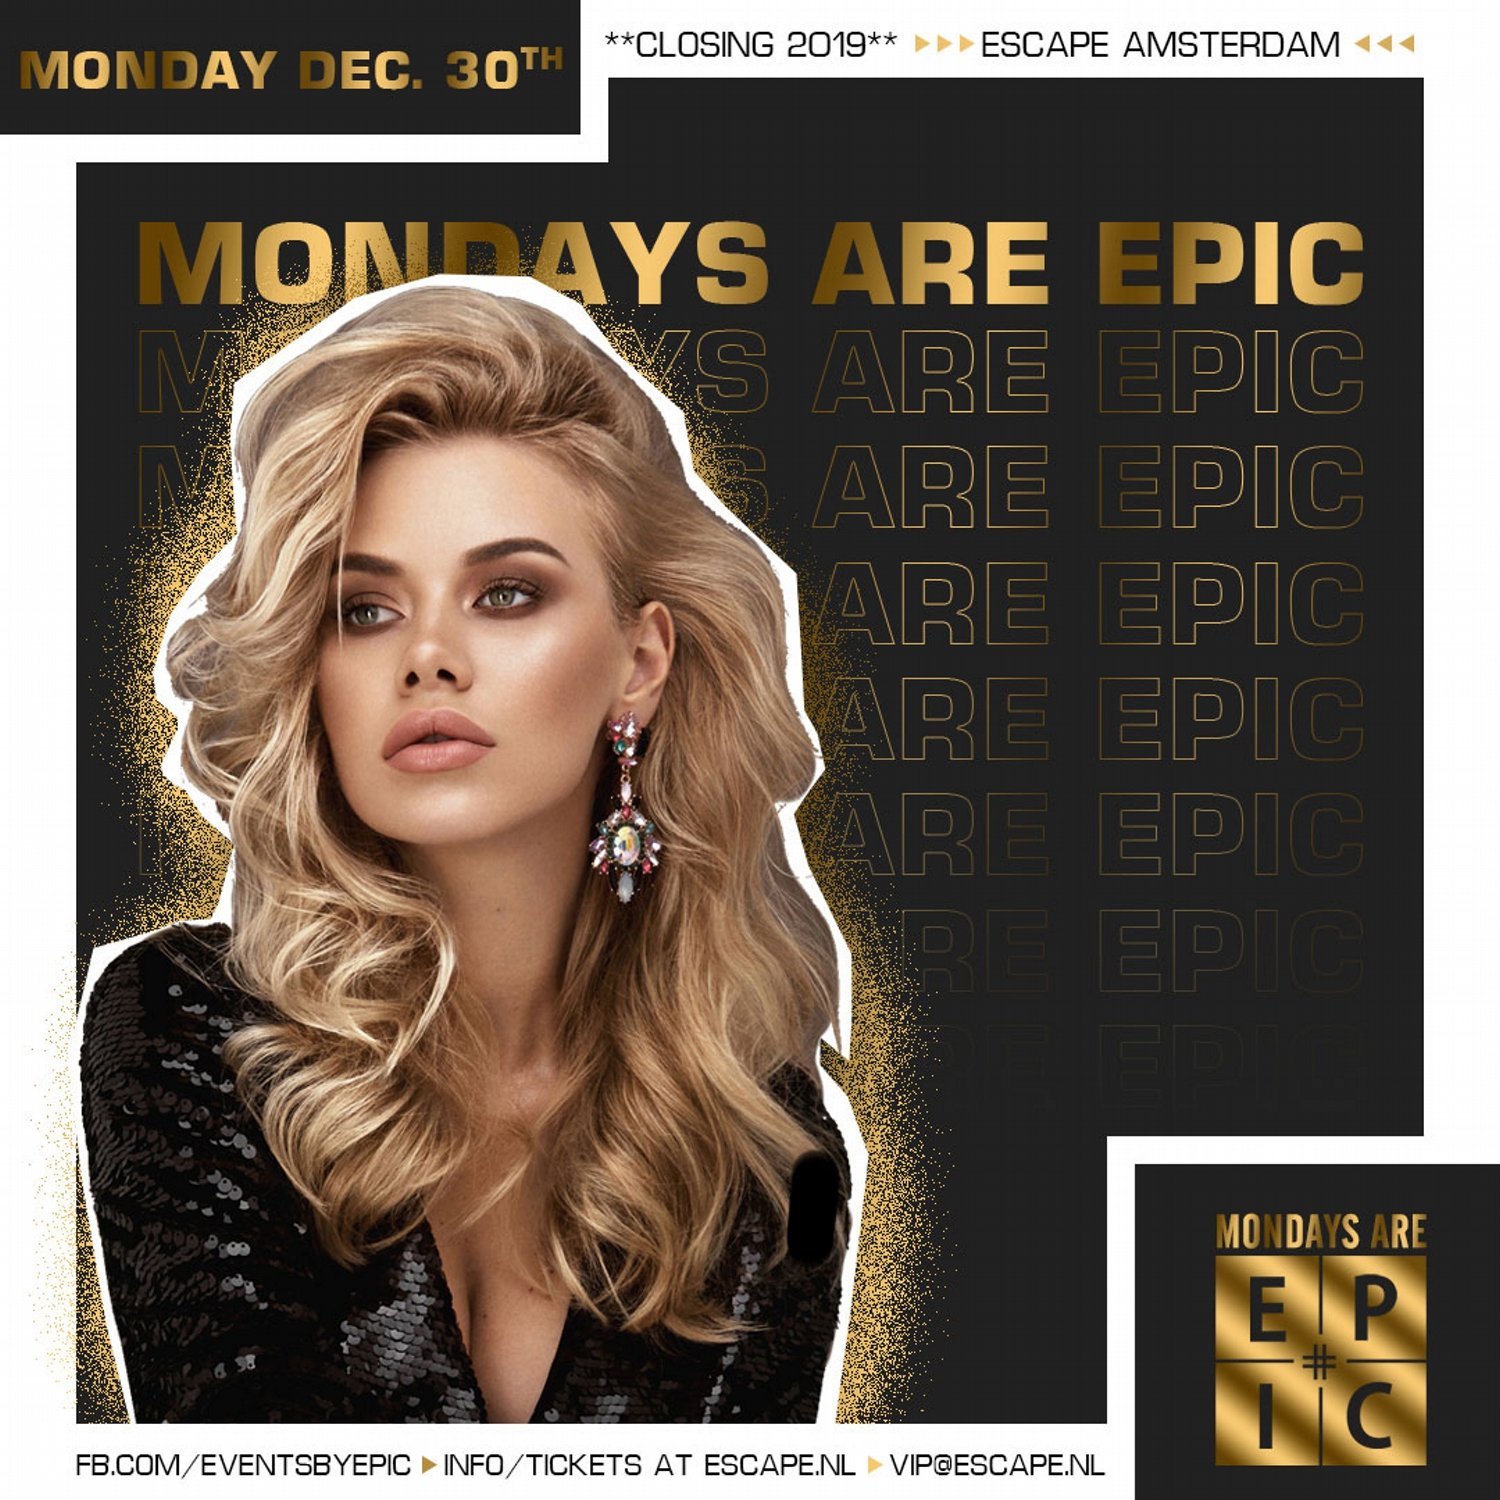 MONDAYS ARE EPIC – 2019 CLOSING PARTY